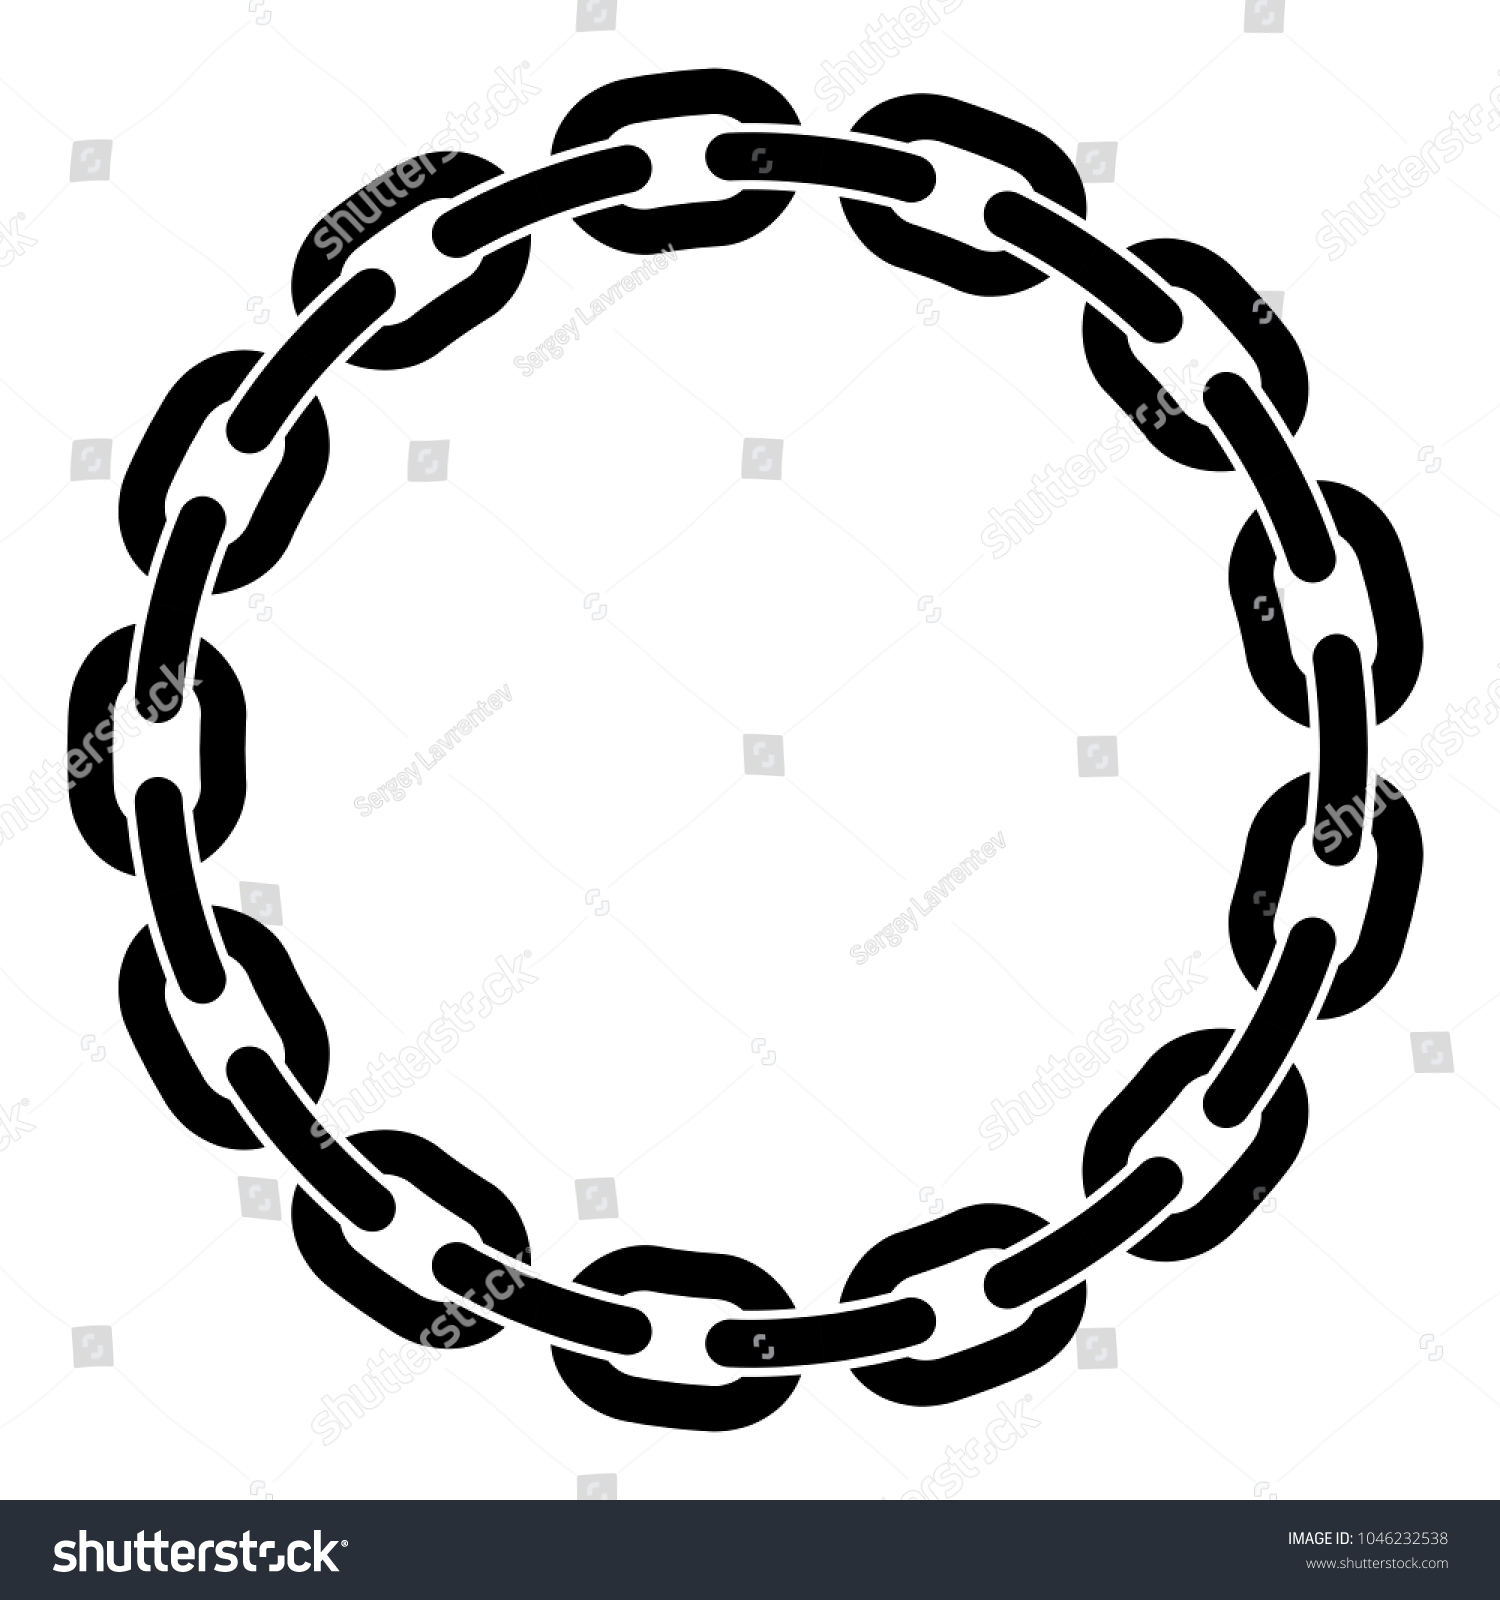 Round Frame Chain On White Background Stock Vector (Royalty Free ...